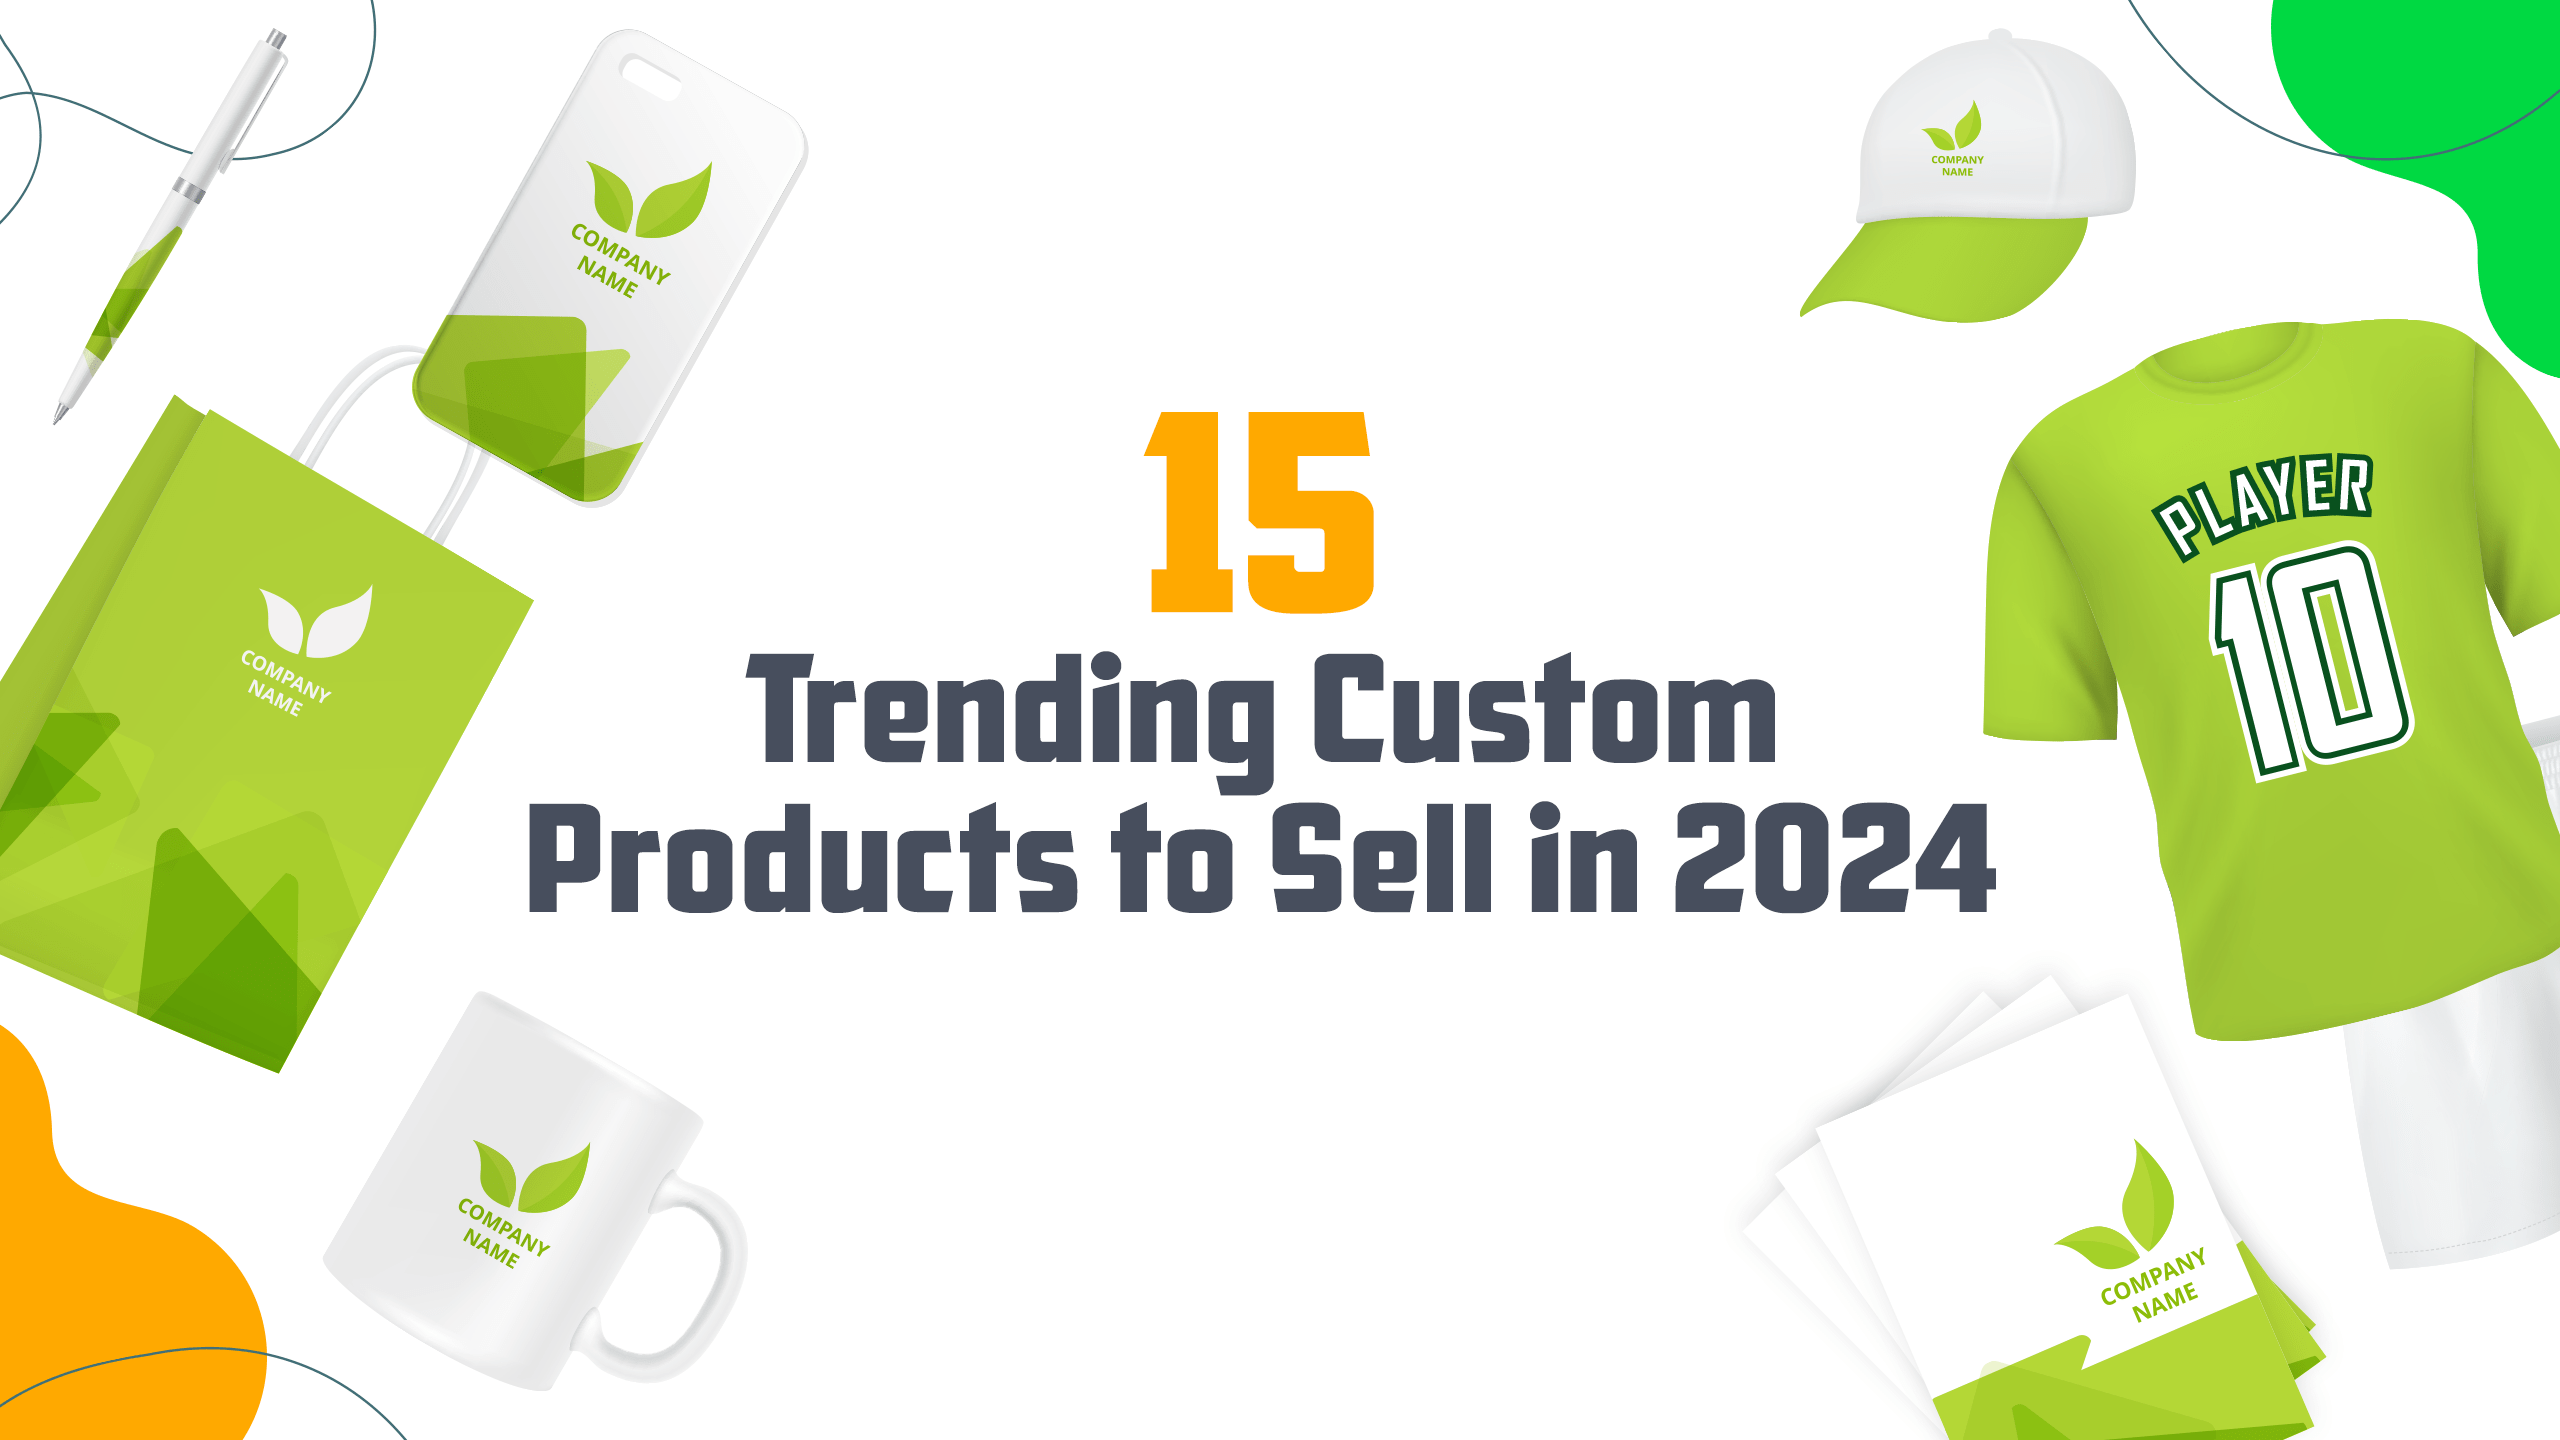 15 Trending Custom Products to Sell